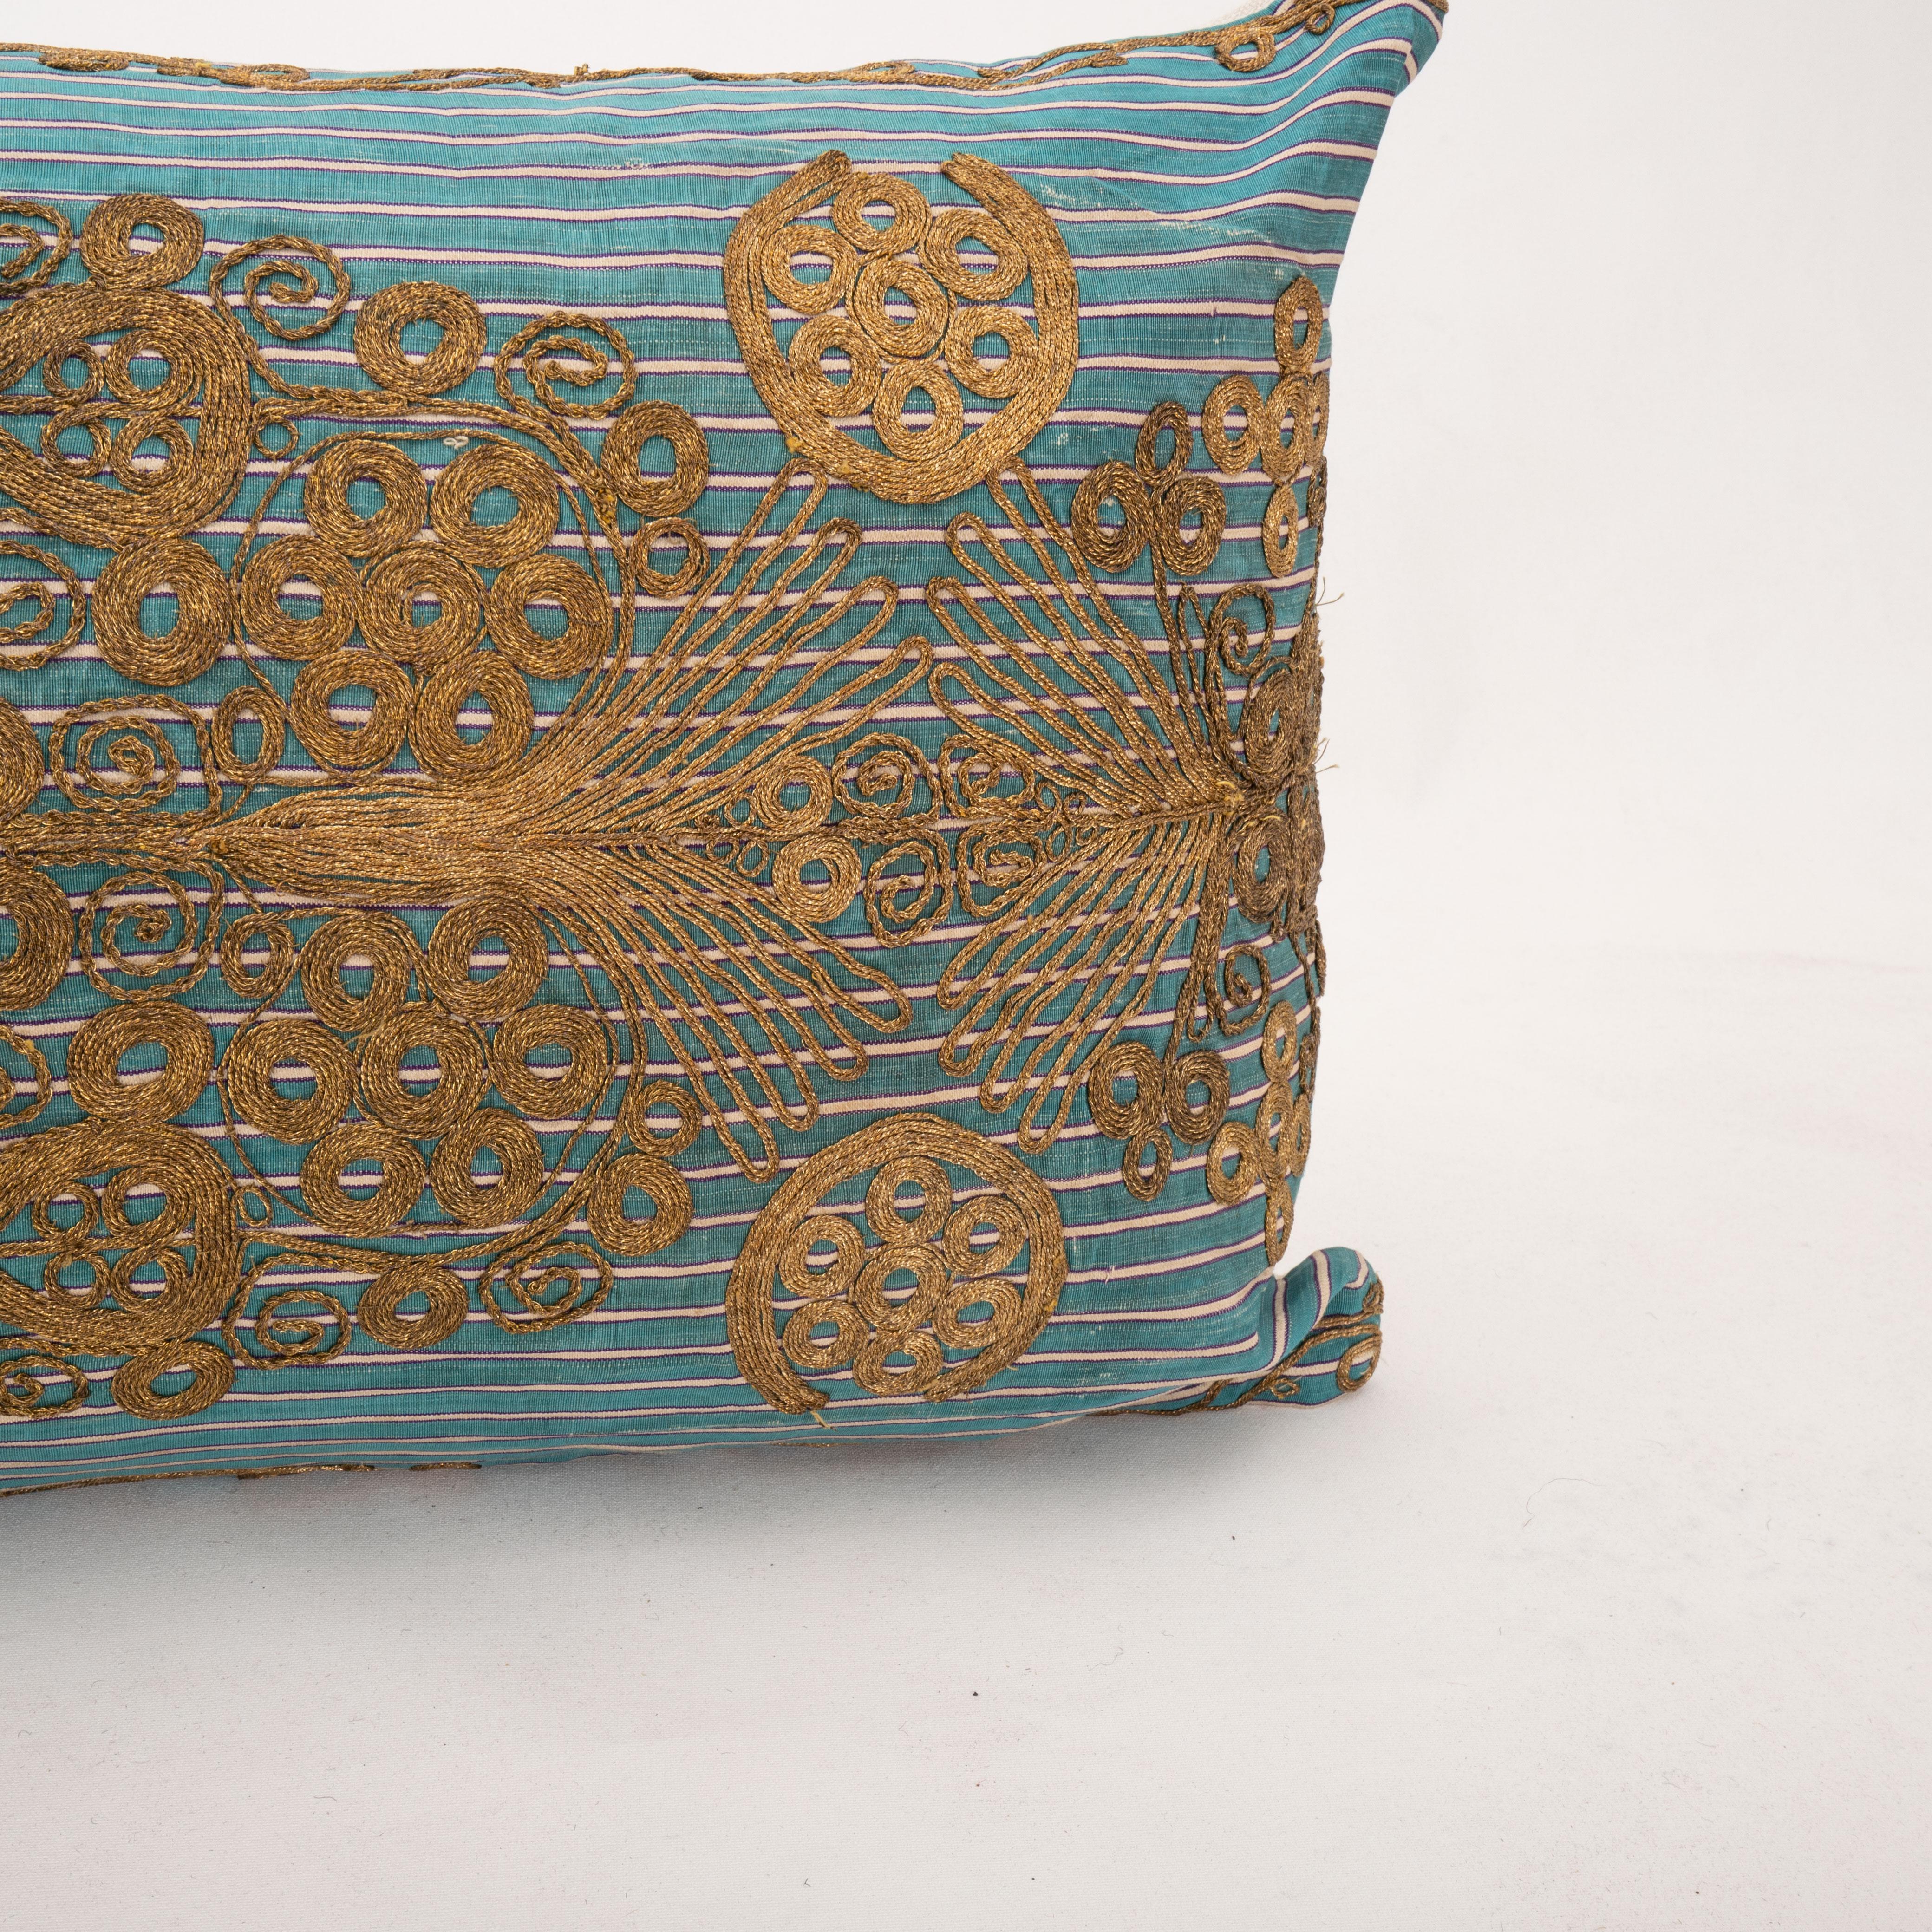 20th Century Antique Ottoman Turkish Pillow Case, Early 20th C.